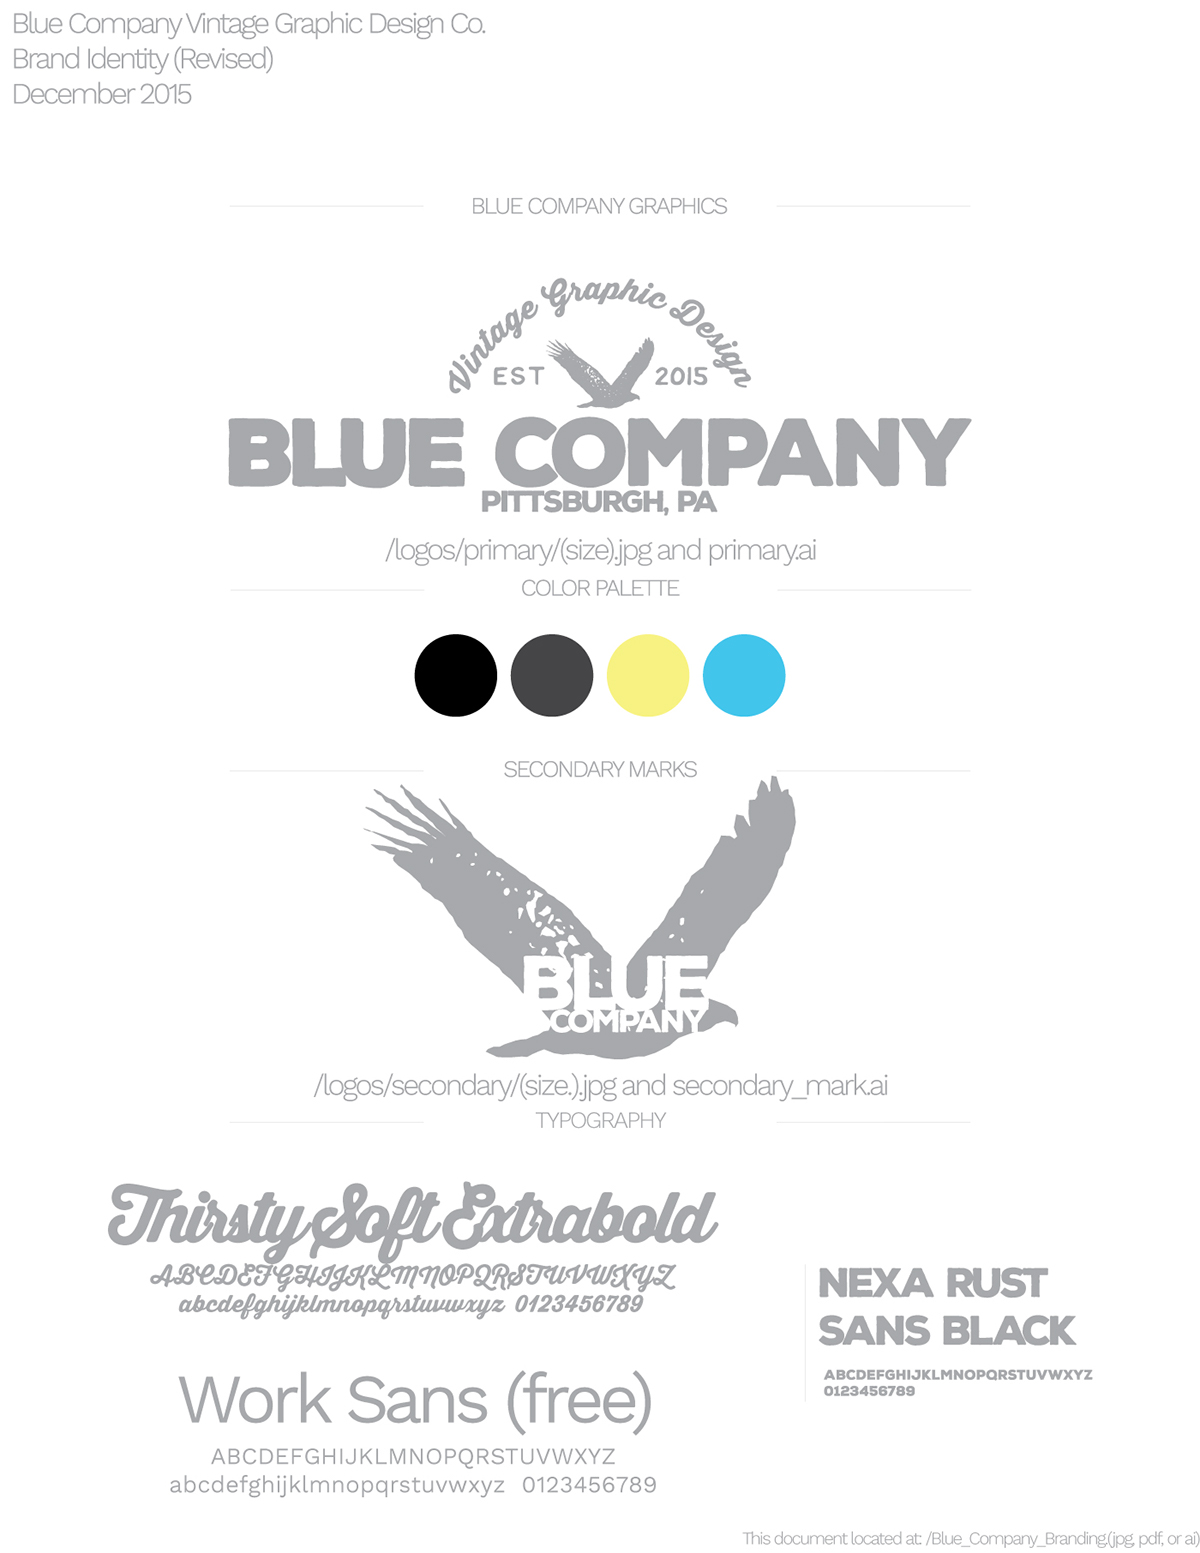 graphic design blue company vintage Co. co Aiden Patrick bluecompanygraphics.com identity Pittsburgh PA Hipster